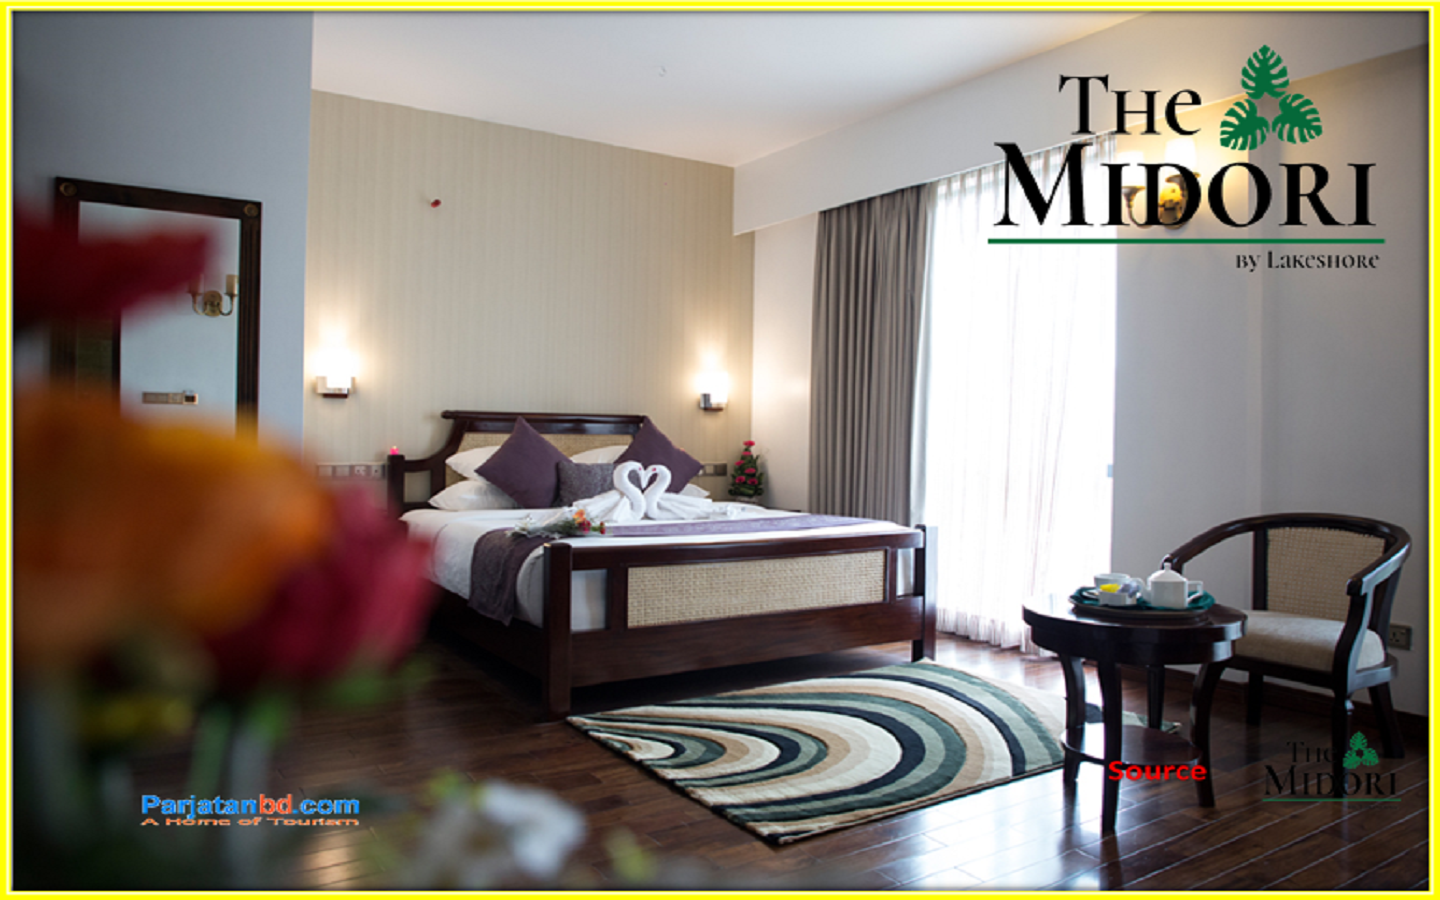 Room Park View Suite -1, The Midori by Lakeshore, Gulshan 2